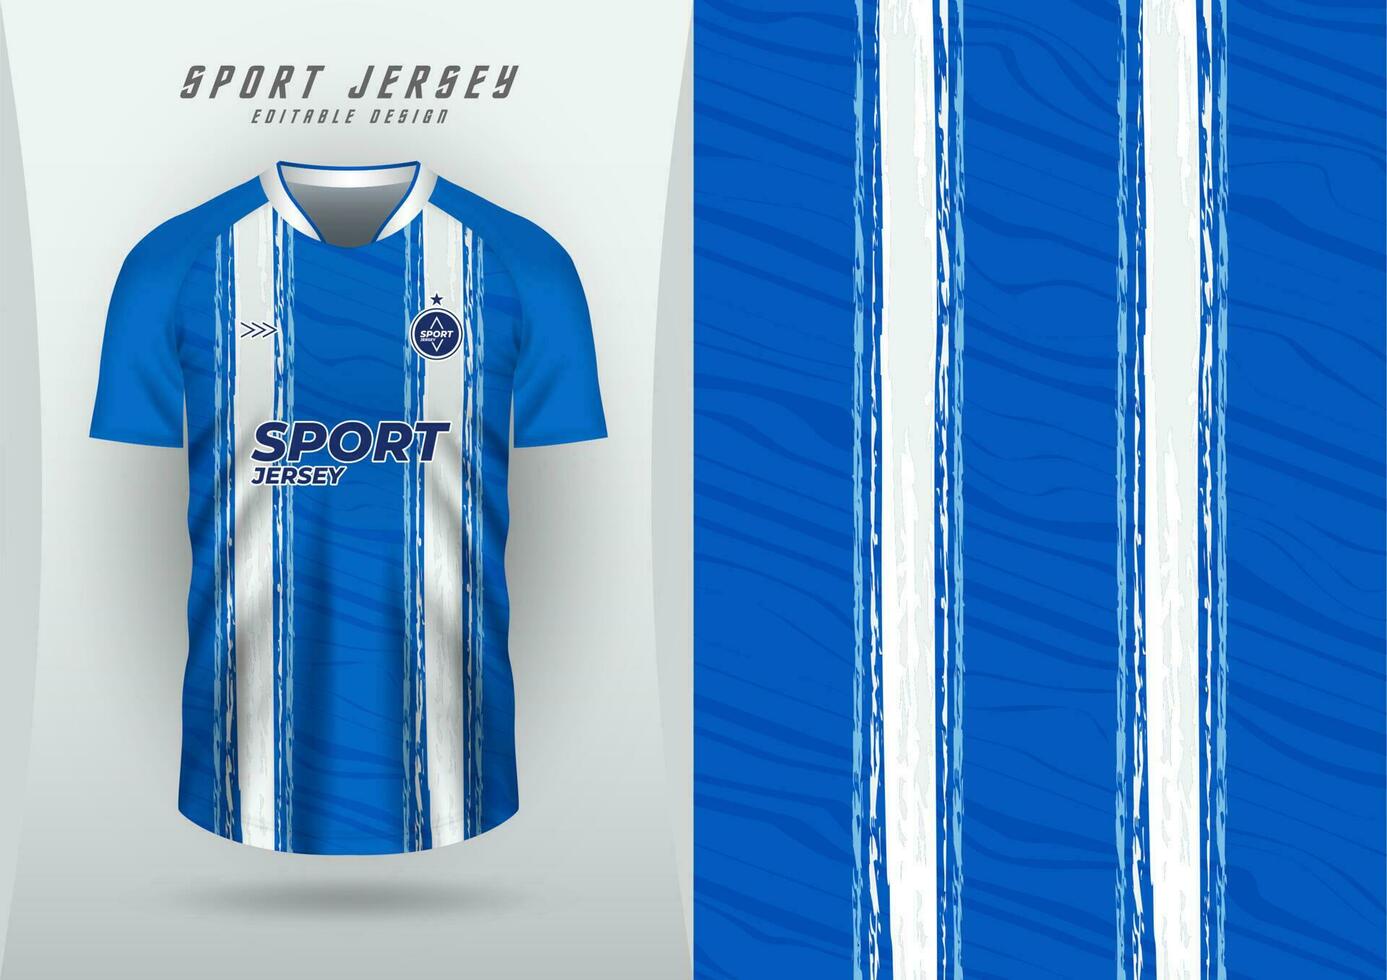 Background for sports jersey, soccer jersey, running jersey, racing jersey, blue pattern with white stripes. vector